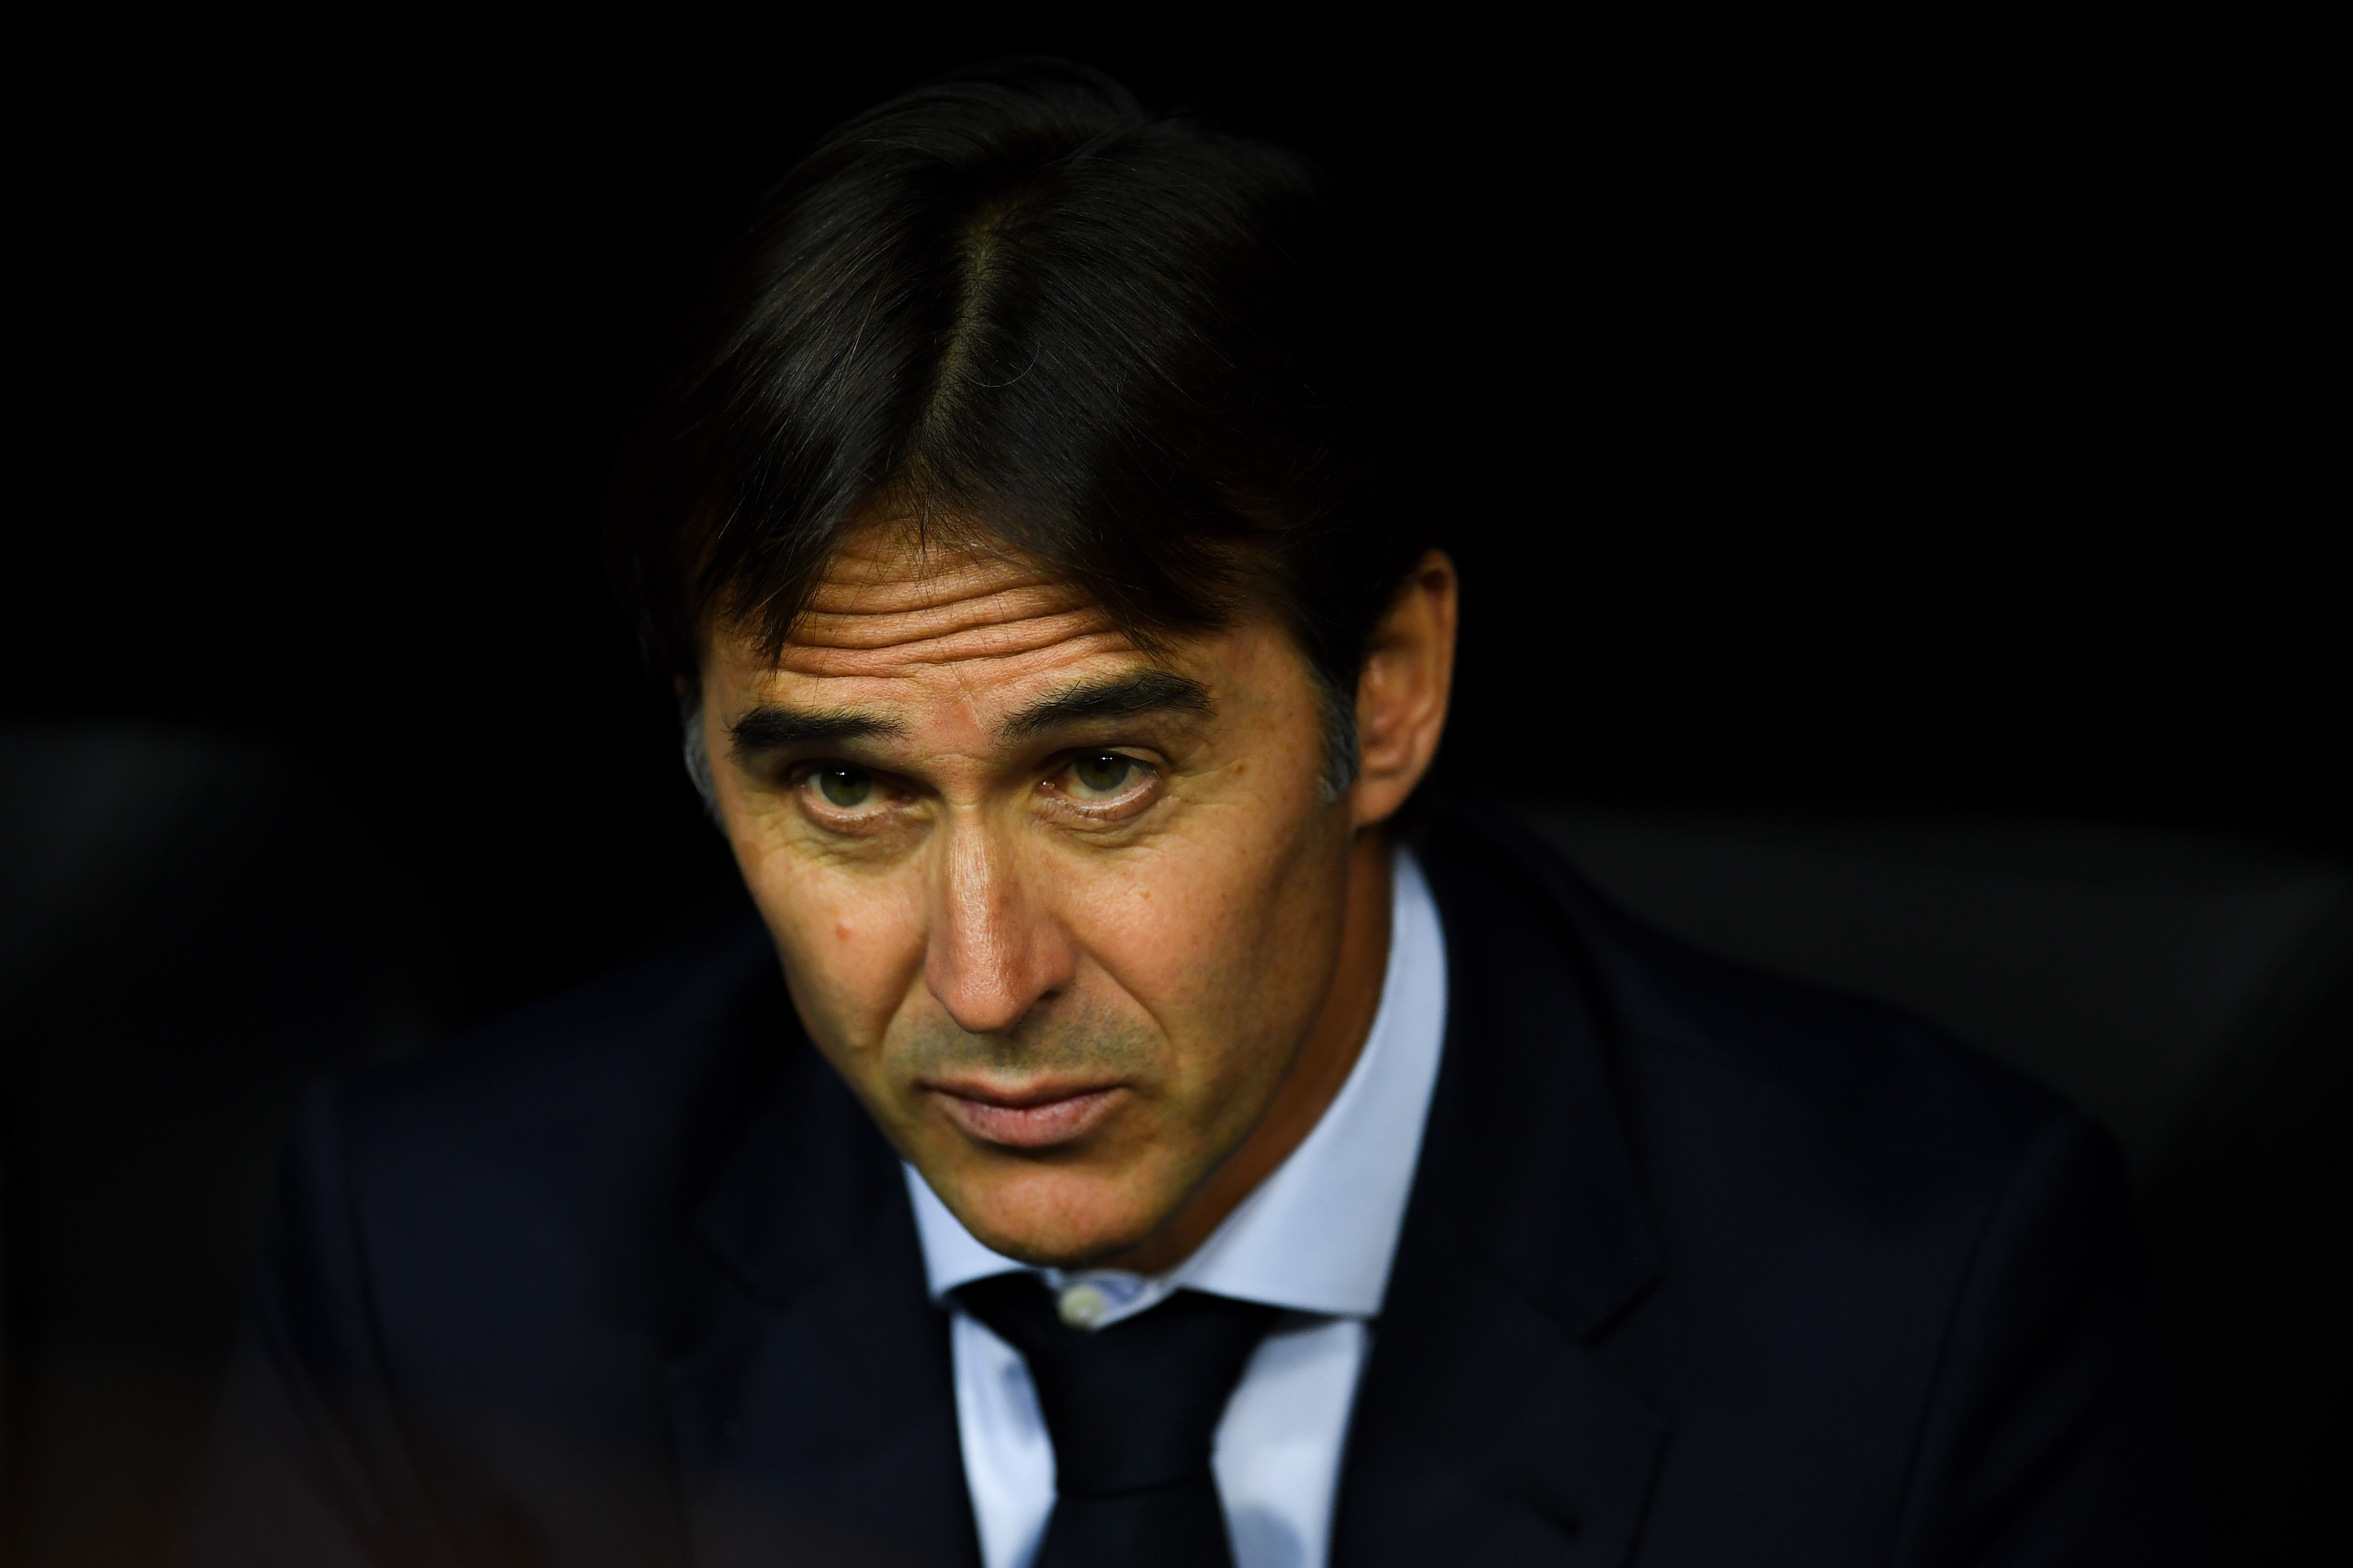 MADRID, SPAIN - SEPTEMBER 02:  Head Coach Julen Lopetegui of Spain looks on during the FIFA 2018 World Cup Qualifier between Spain and Italy at Estadio Santiago Bernabeu on September 2, 2017 in Madrid, Spain.  (Photo by David Ramos/Getty Images)